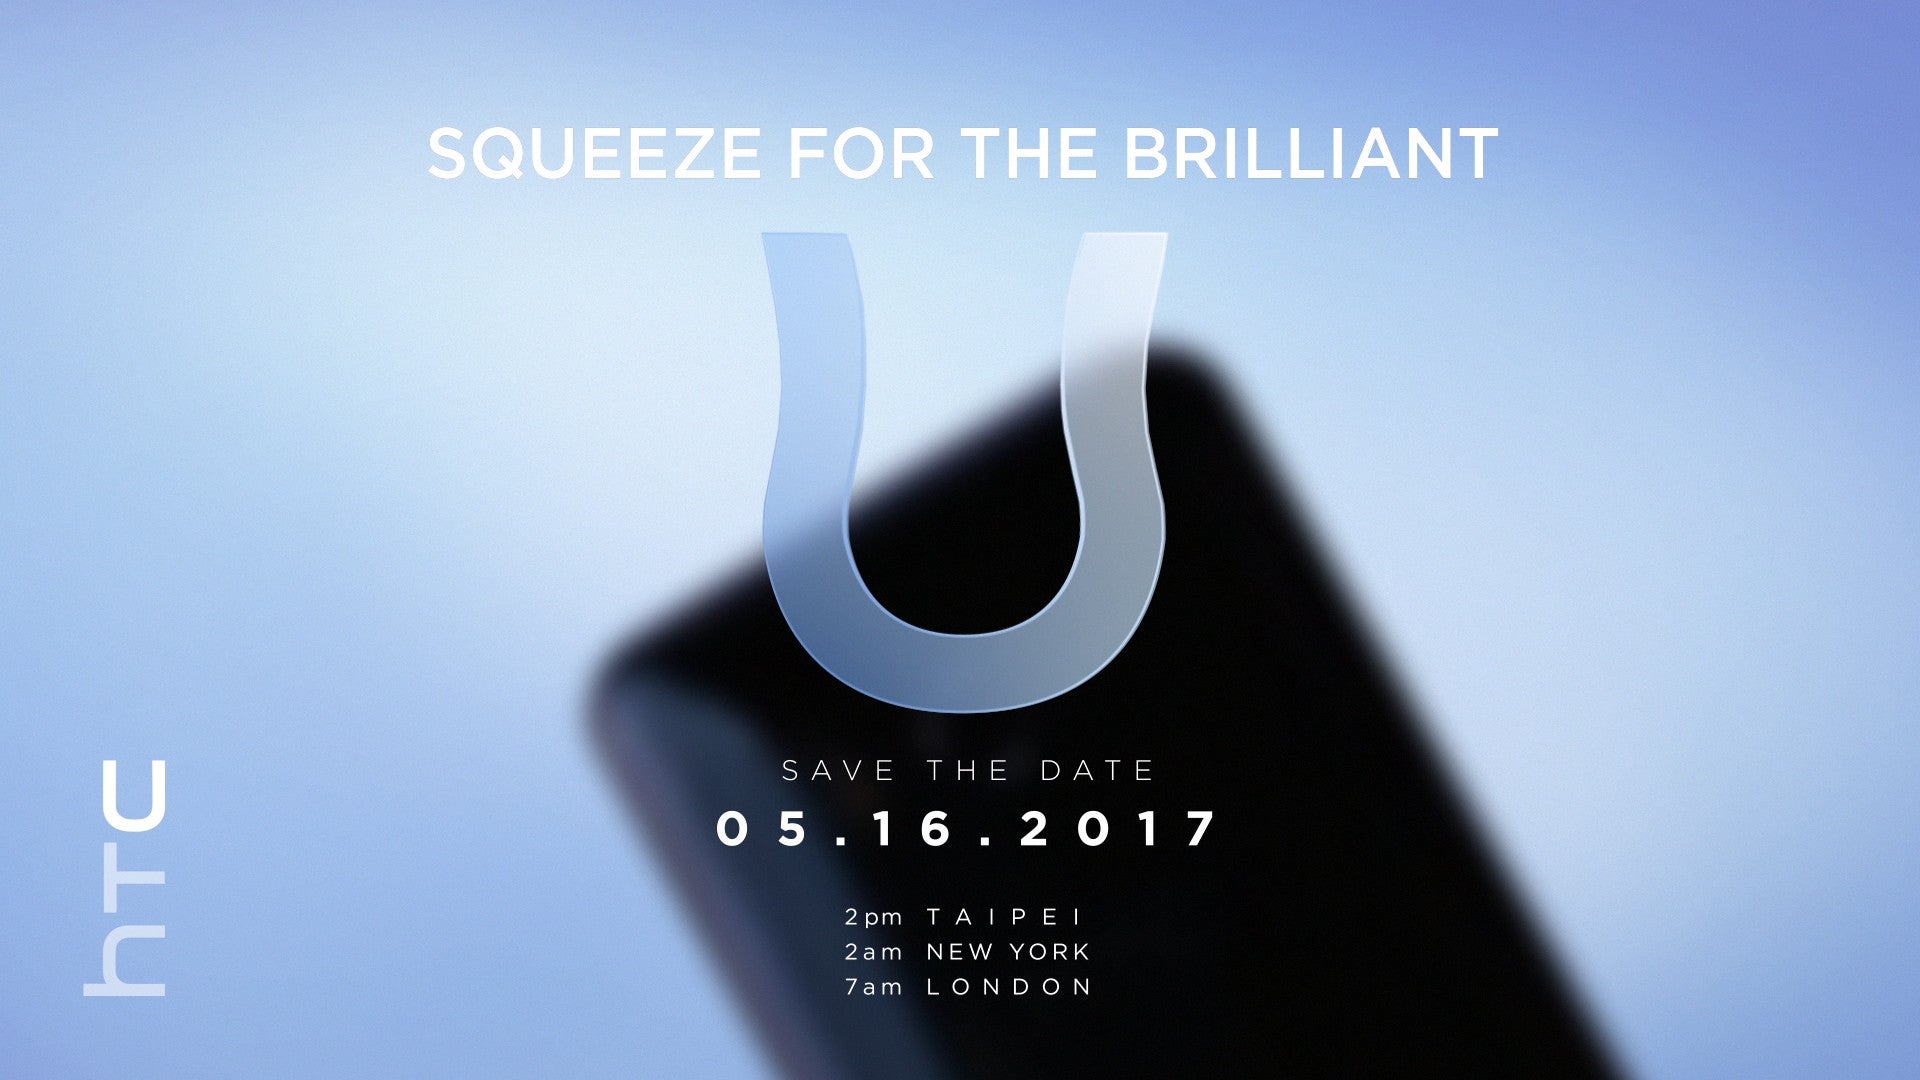 The HTC U (Ocean) will be unveiled on May 16, check out the official invitation and a teaser video